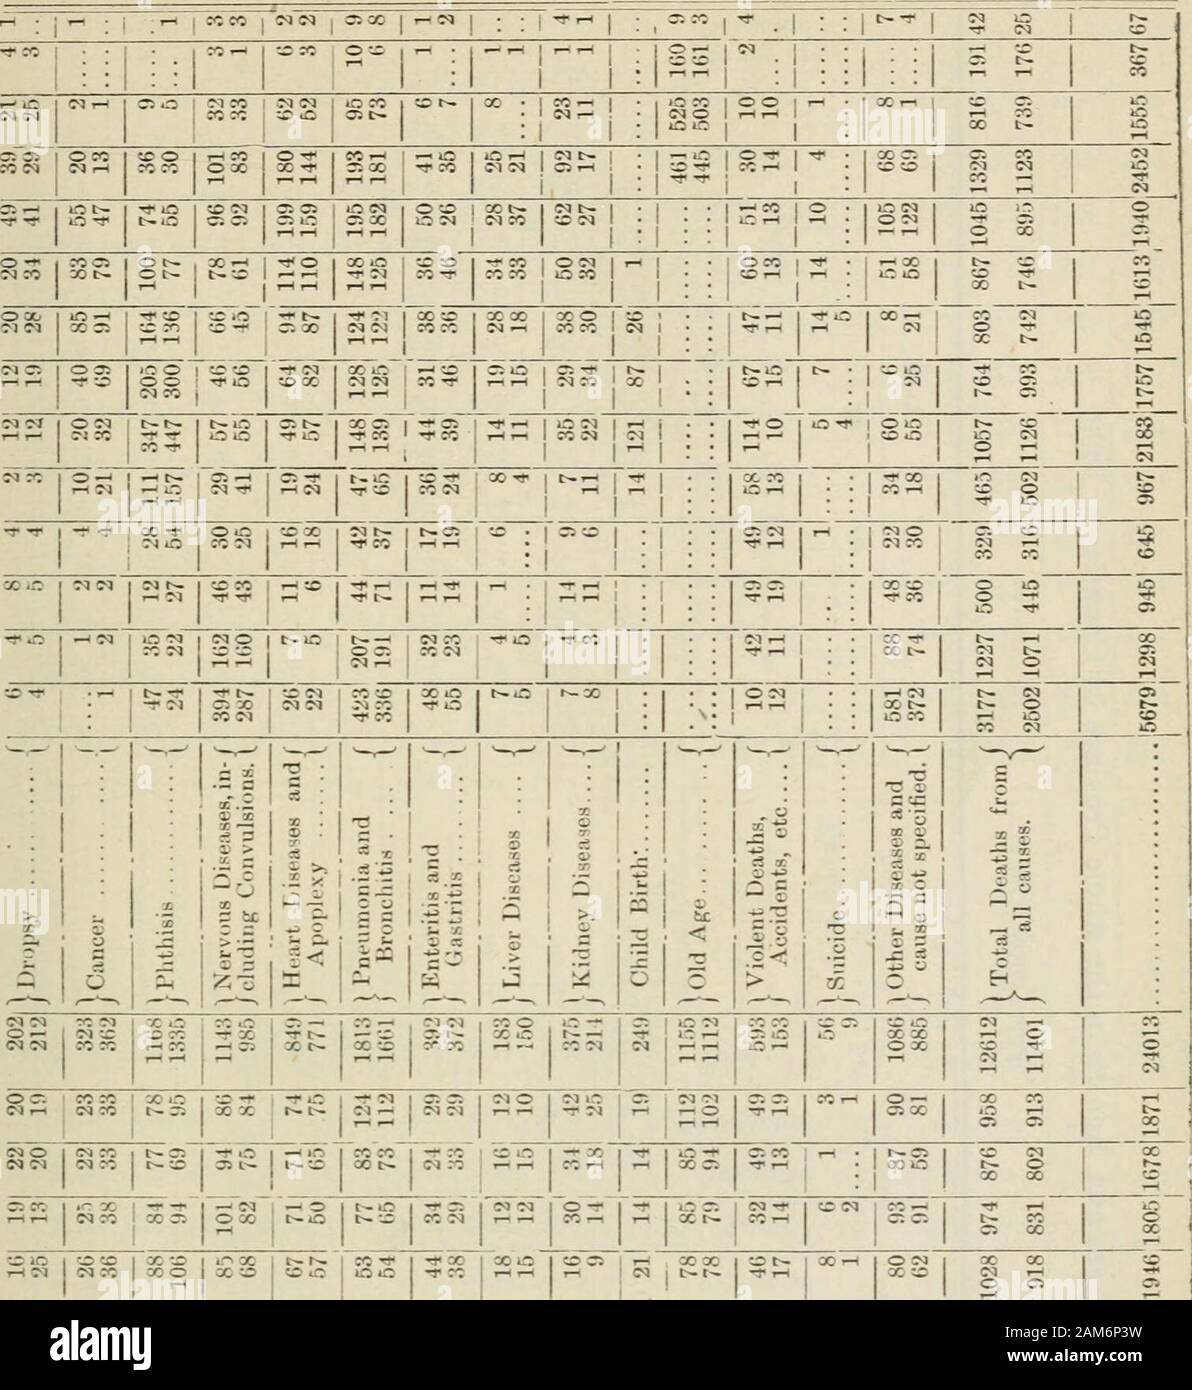 Ontario Sessional Papers, 1892, No.8-11 . Sessional Papers (No. 10). A. 1892. T-iZ-t (MM I-l N 00^N JO 8i Si i-i IC -J 5 e. §2 t-rH »Oi-l T-IX 1-1 XrHr-l 1 O IM 8-^ CI 00 S o c;o JO lO ^ n oto N.-1 lO X C&lt;li-l T-l X t- •* r-l Xr- l§ Ci -rO 1-1 X ci ^^ (M n OOO r-l -4. ec ^S lOX (M(M s xti Cir-I t-T-l C5050 l^ (M s cc o r: ON 1-1 i— 1 ow (N CO 1-1 OC&lt;5 ec (M e5 ; TT CO O T-i t^ (MiO iCOtO lOO lOO i-l C5 X lO Tf CO 1-1 ?* So o r£3 H m I—I Oeg 0(2&lt;G ea •J8AO pOT! 001 I 94 b- I eoc^ I Oico I : : i : •J940 pas 06 ?. •# I ?£ t- •Qi o; 09 •* QO 1 t-IH 09 01 OS •OQ o* Of Of o!&gt; 08 00 (M T- Stock Photo